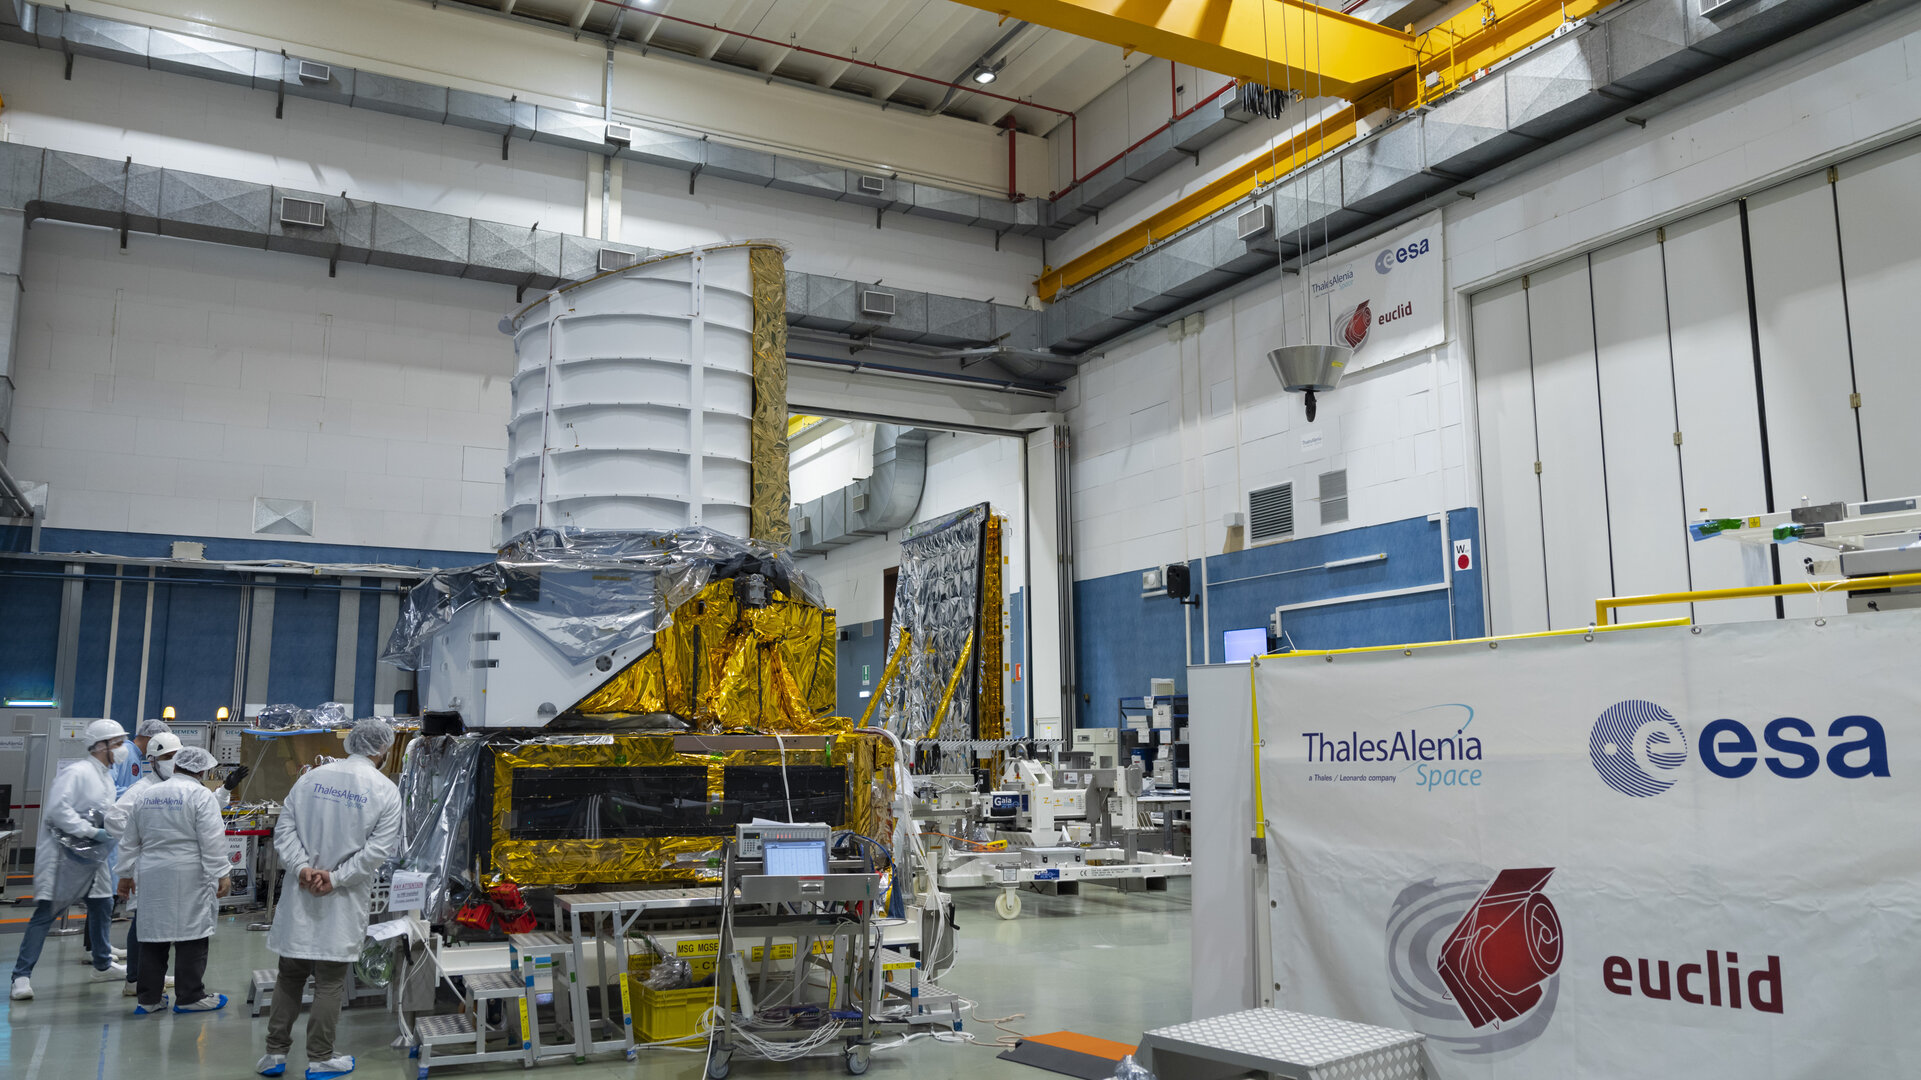 ESA, Thales Alenia Space and Airbus engineers attach Euclid’s payload and service modules